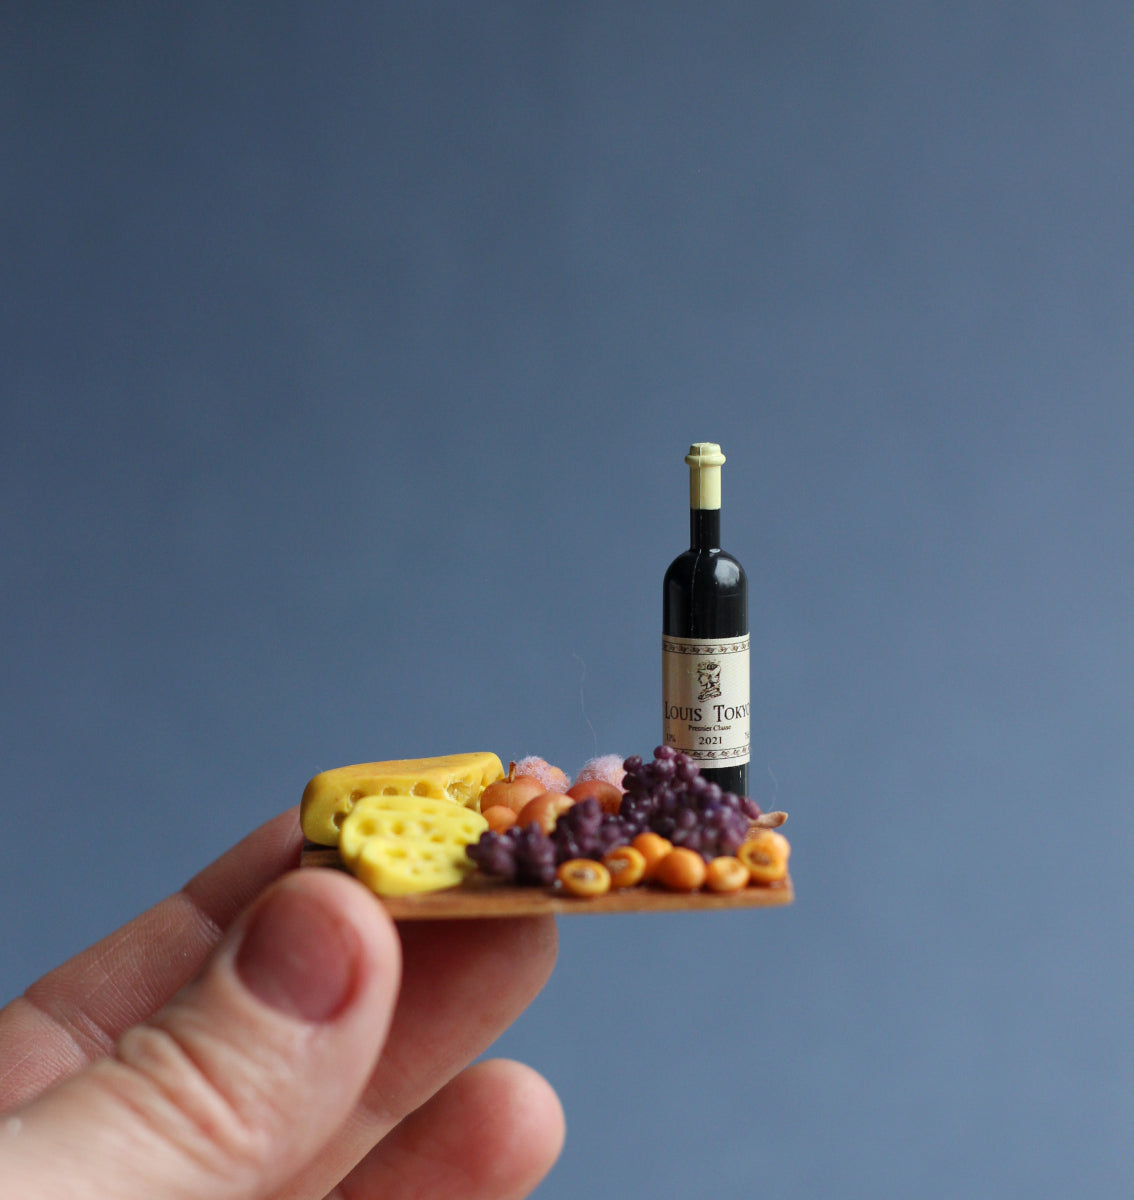 1:6 fruit, cheese and wine cutting board for dollhouse